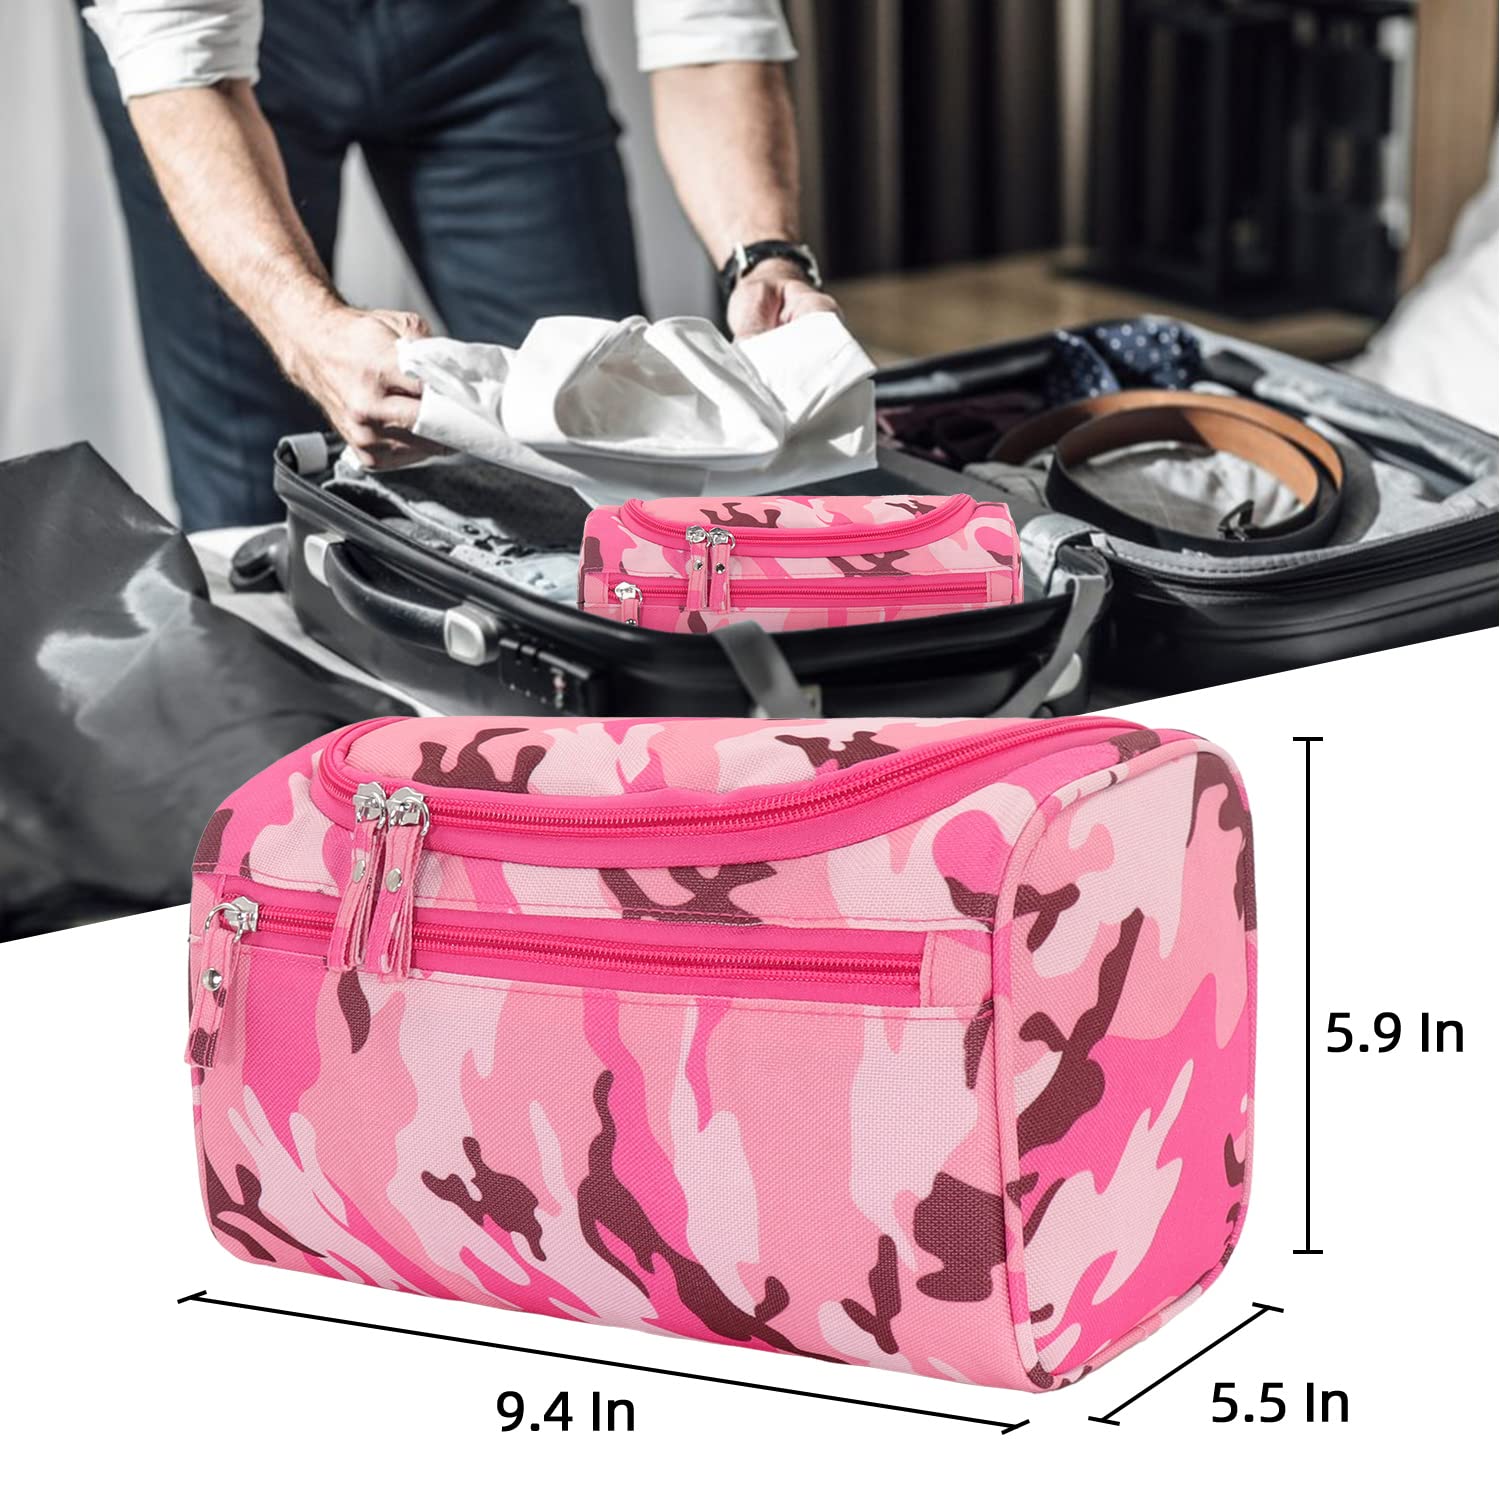 Buruis Travel Toiletry Bag for Men and Women, Hanging Toiletry Organizer Cosmetics Makeup Bag, Water-resistant Dopp Kit Shaving Bag, Small Toiletry Bag for Travel Essentials, Accessories (Camo Pink)